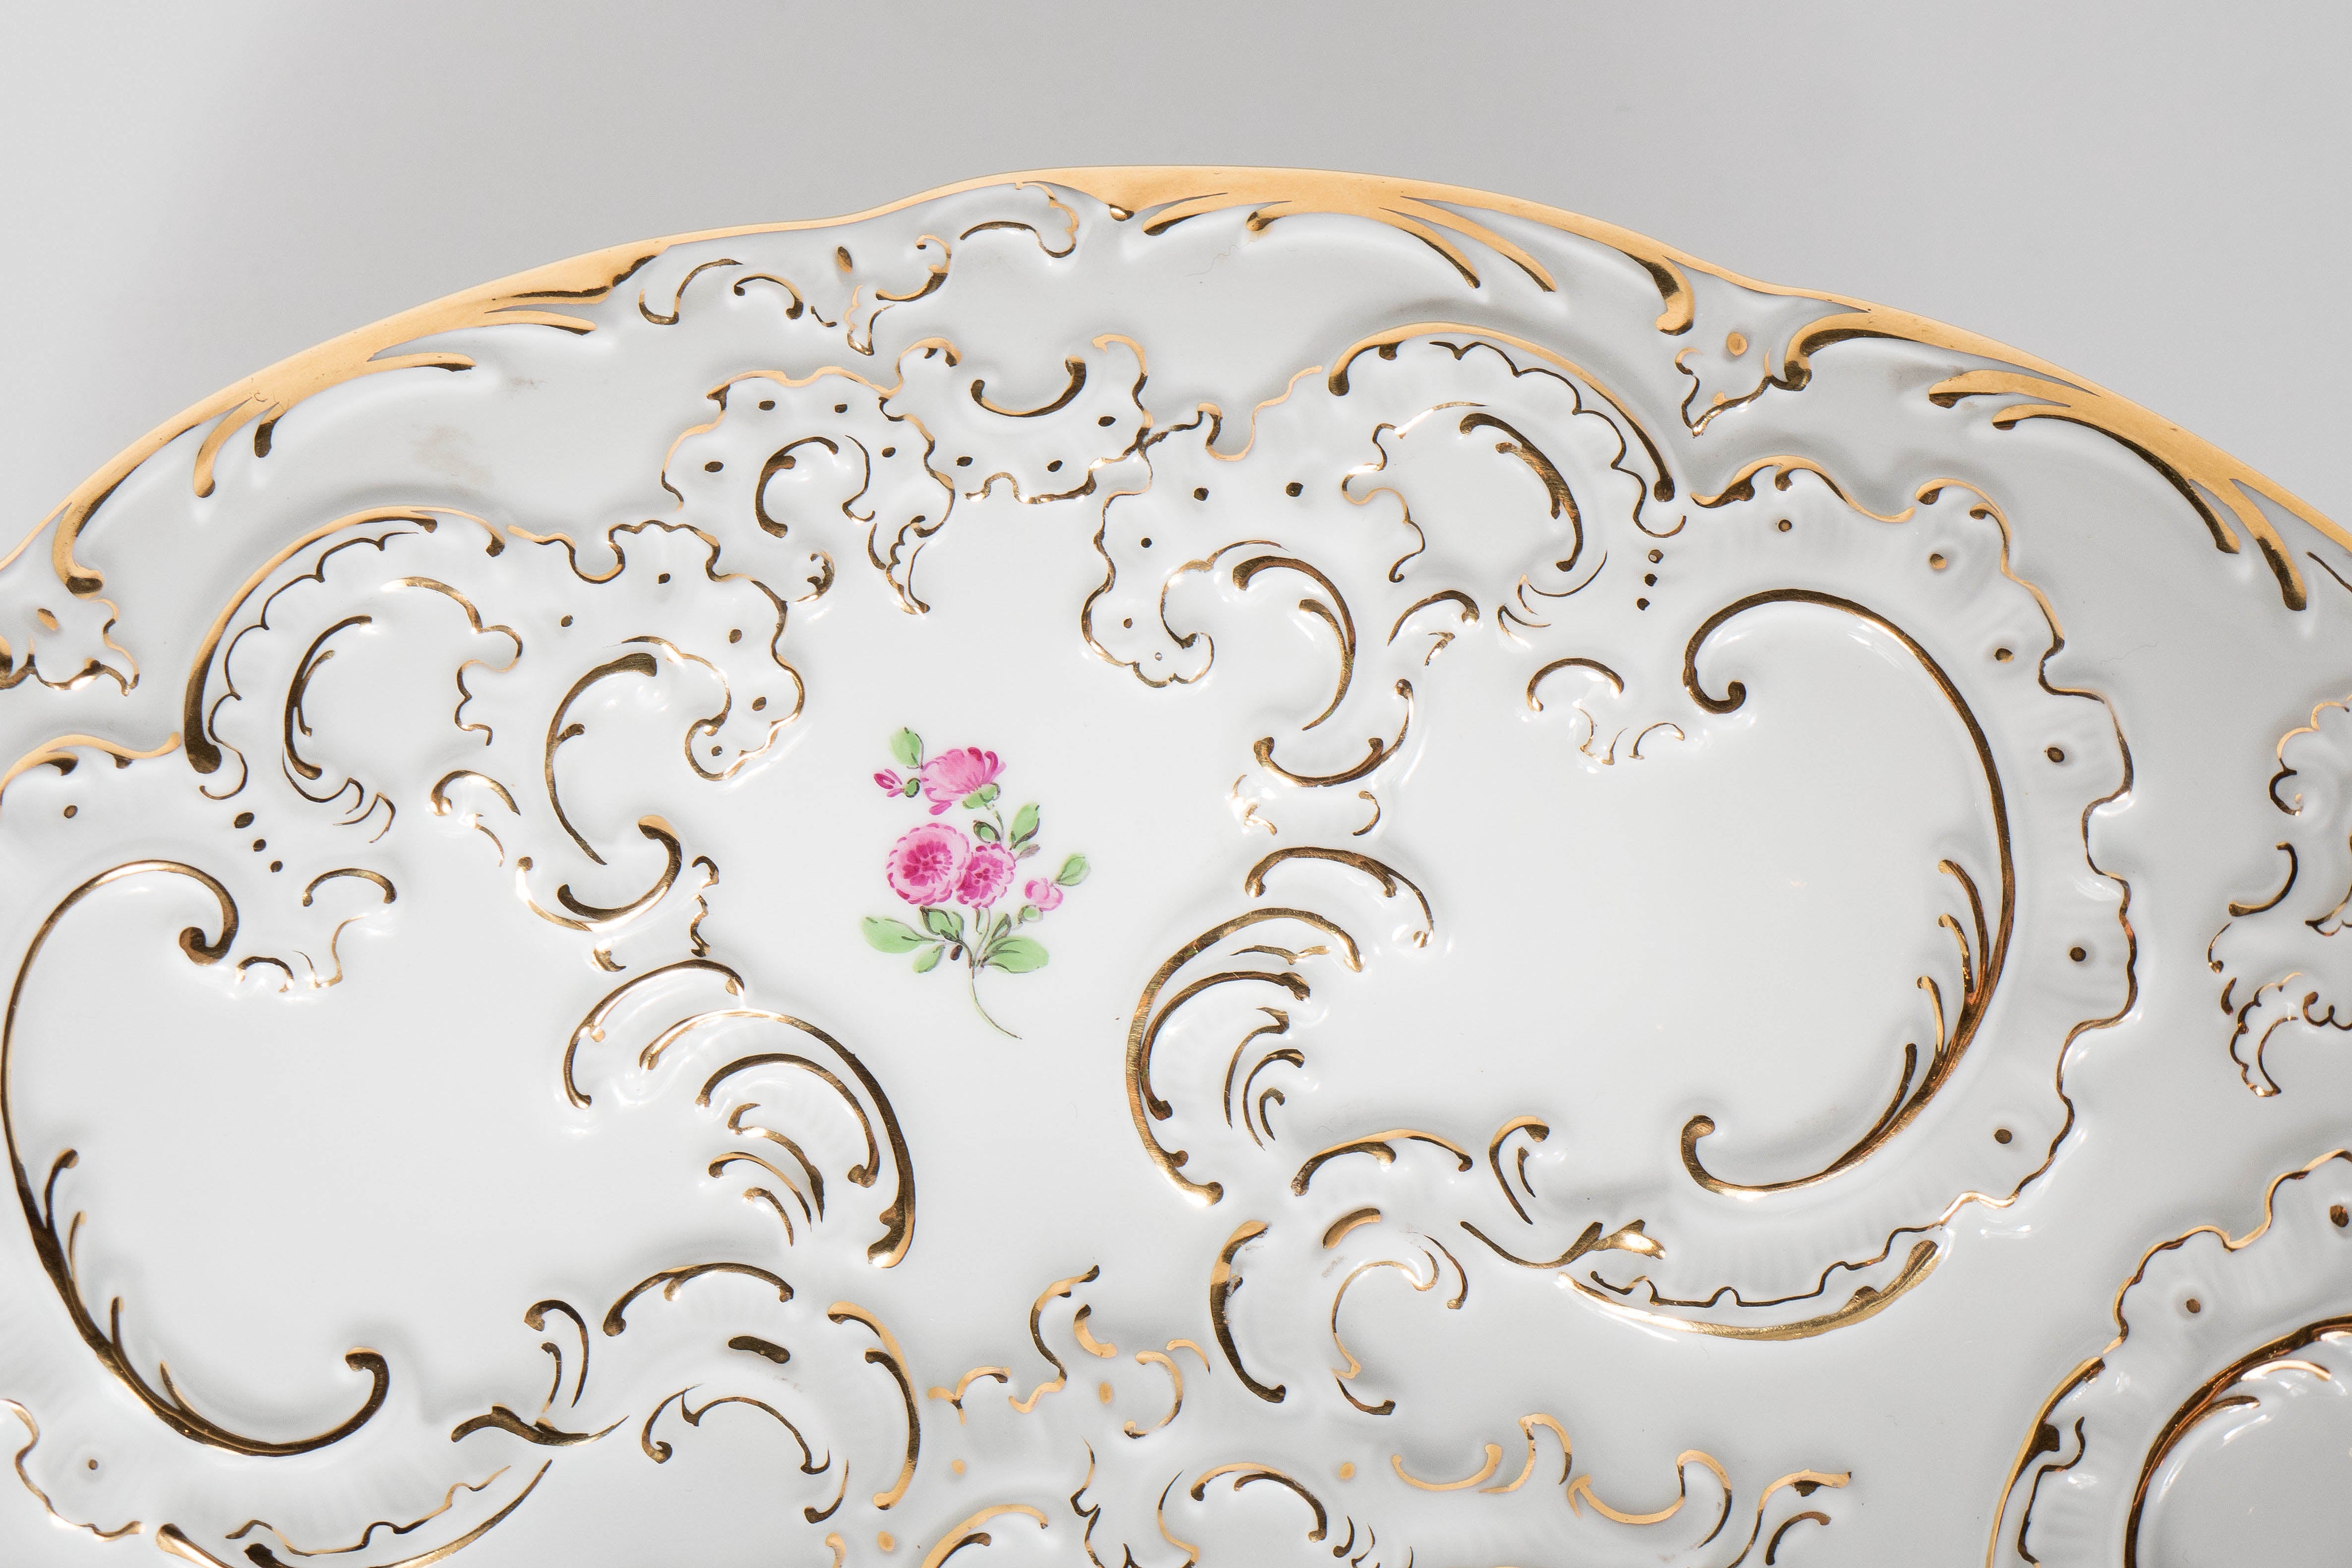 German Exquisite Classical Relief-Form Porcelain Bowl with Floral Design by Meissen